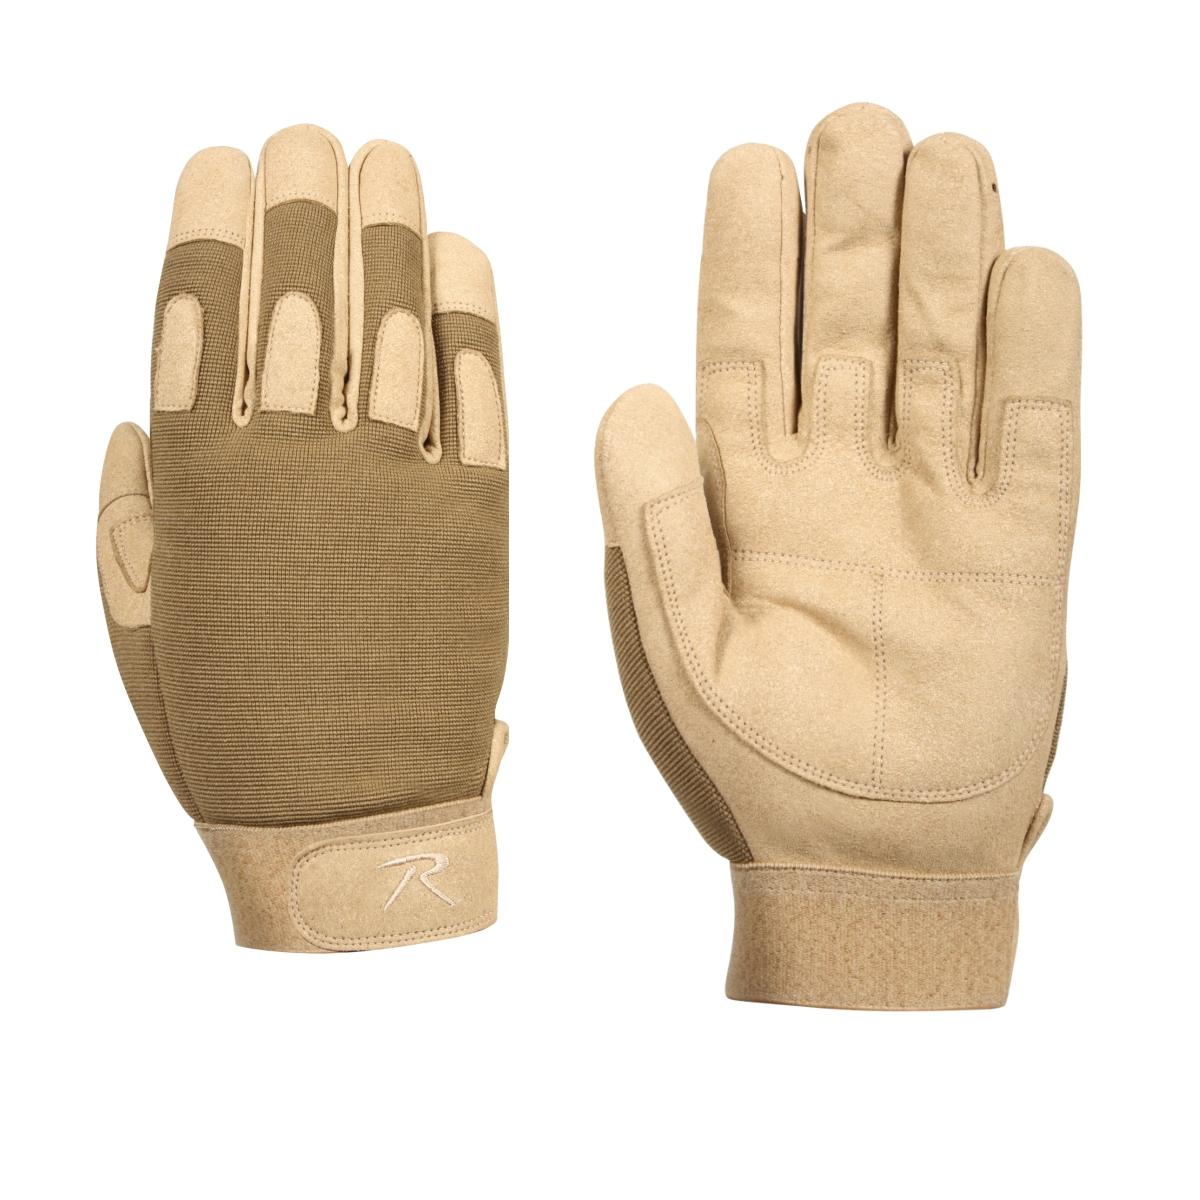 Rothco Lightweight All Purpose Duty Gloves